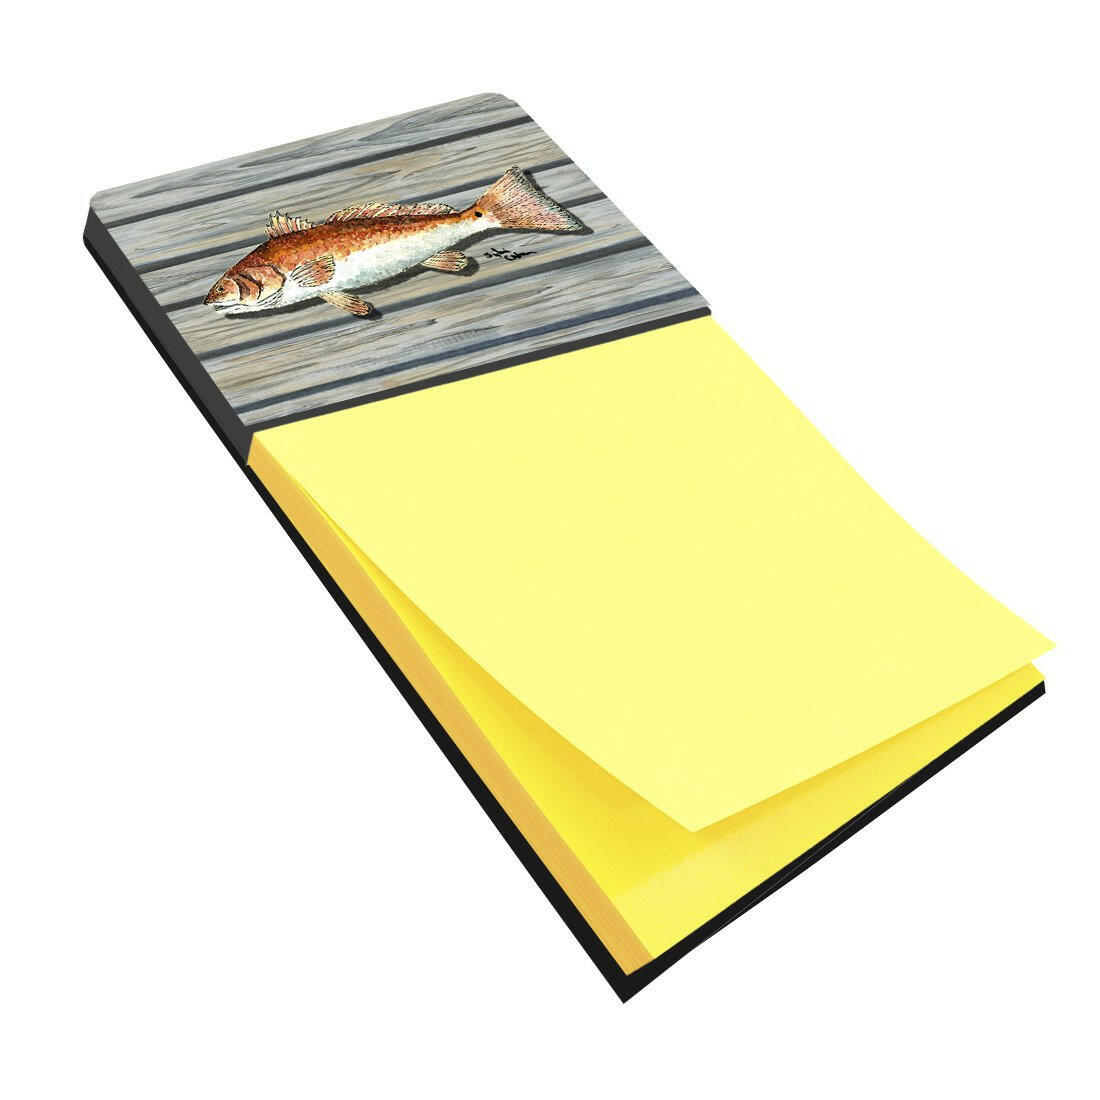 Red Fish Refiillable Sticky Note Holder or Postit Note Dispenser 8489SN by Caroline's Treasures